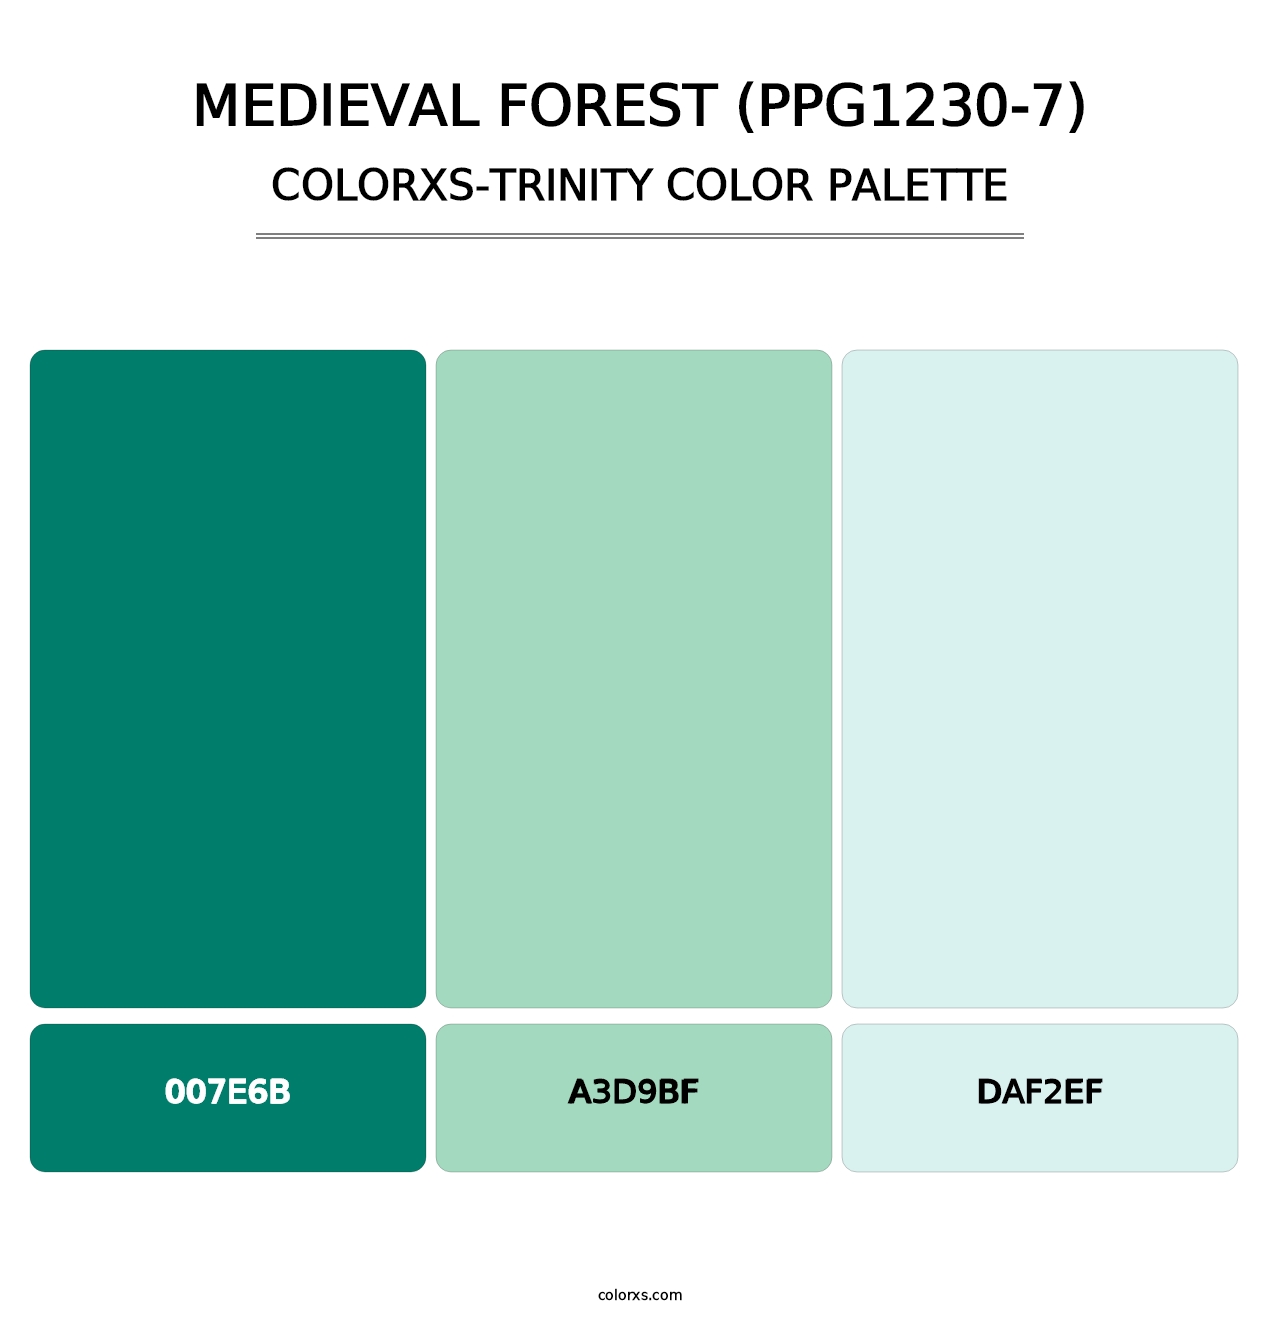 Medieval Forest (PPG1230-7) - Colorxs Trinity Palette